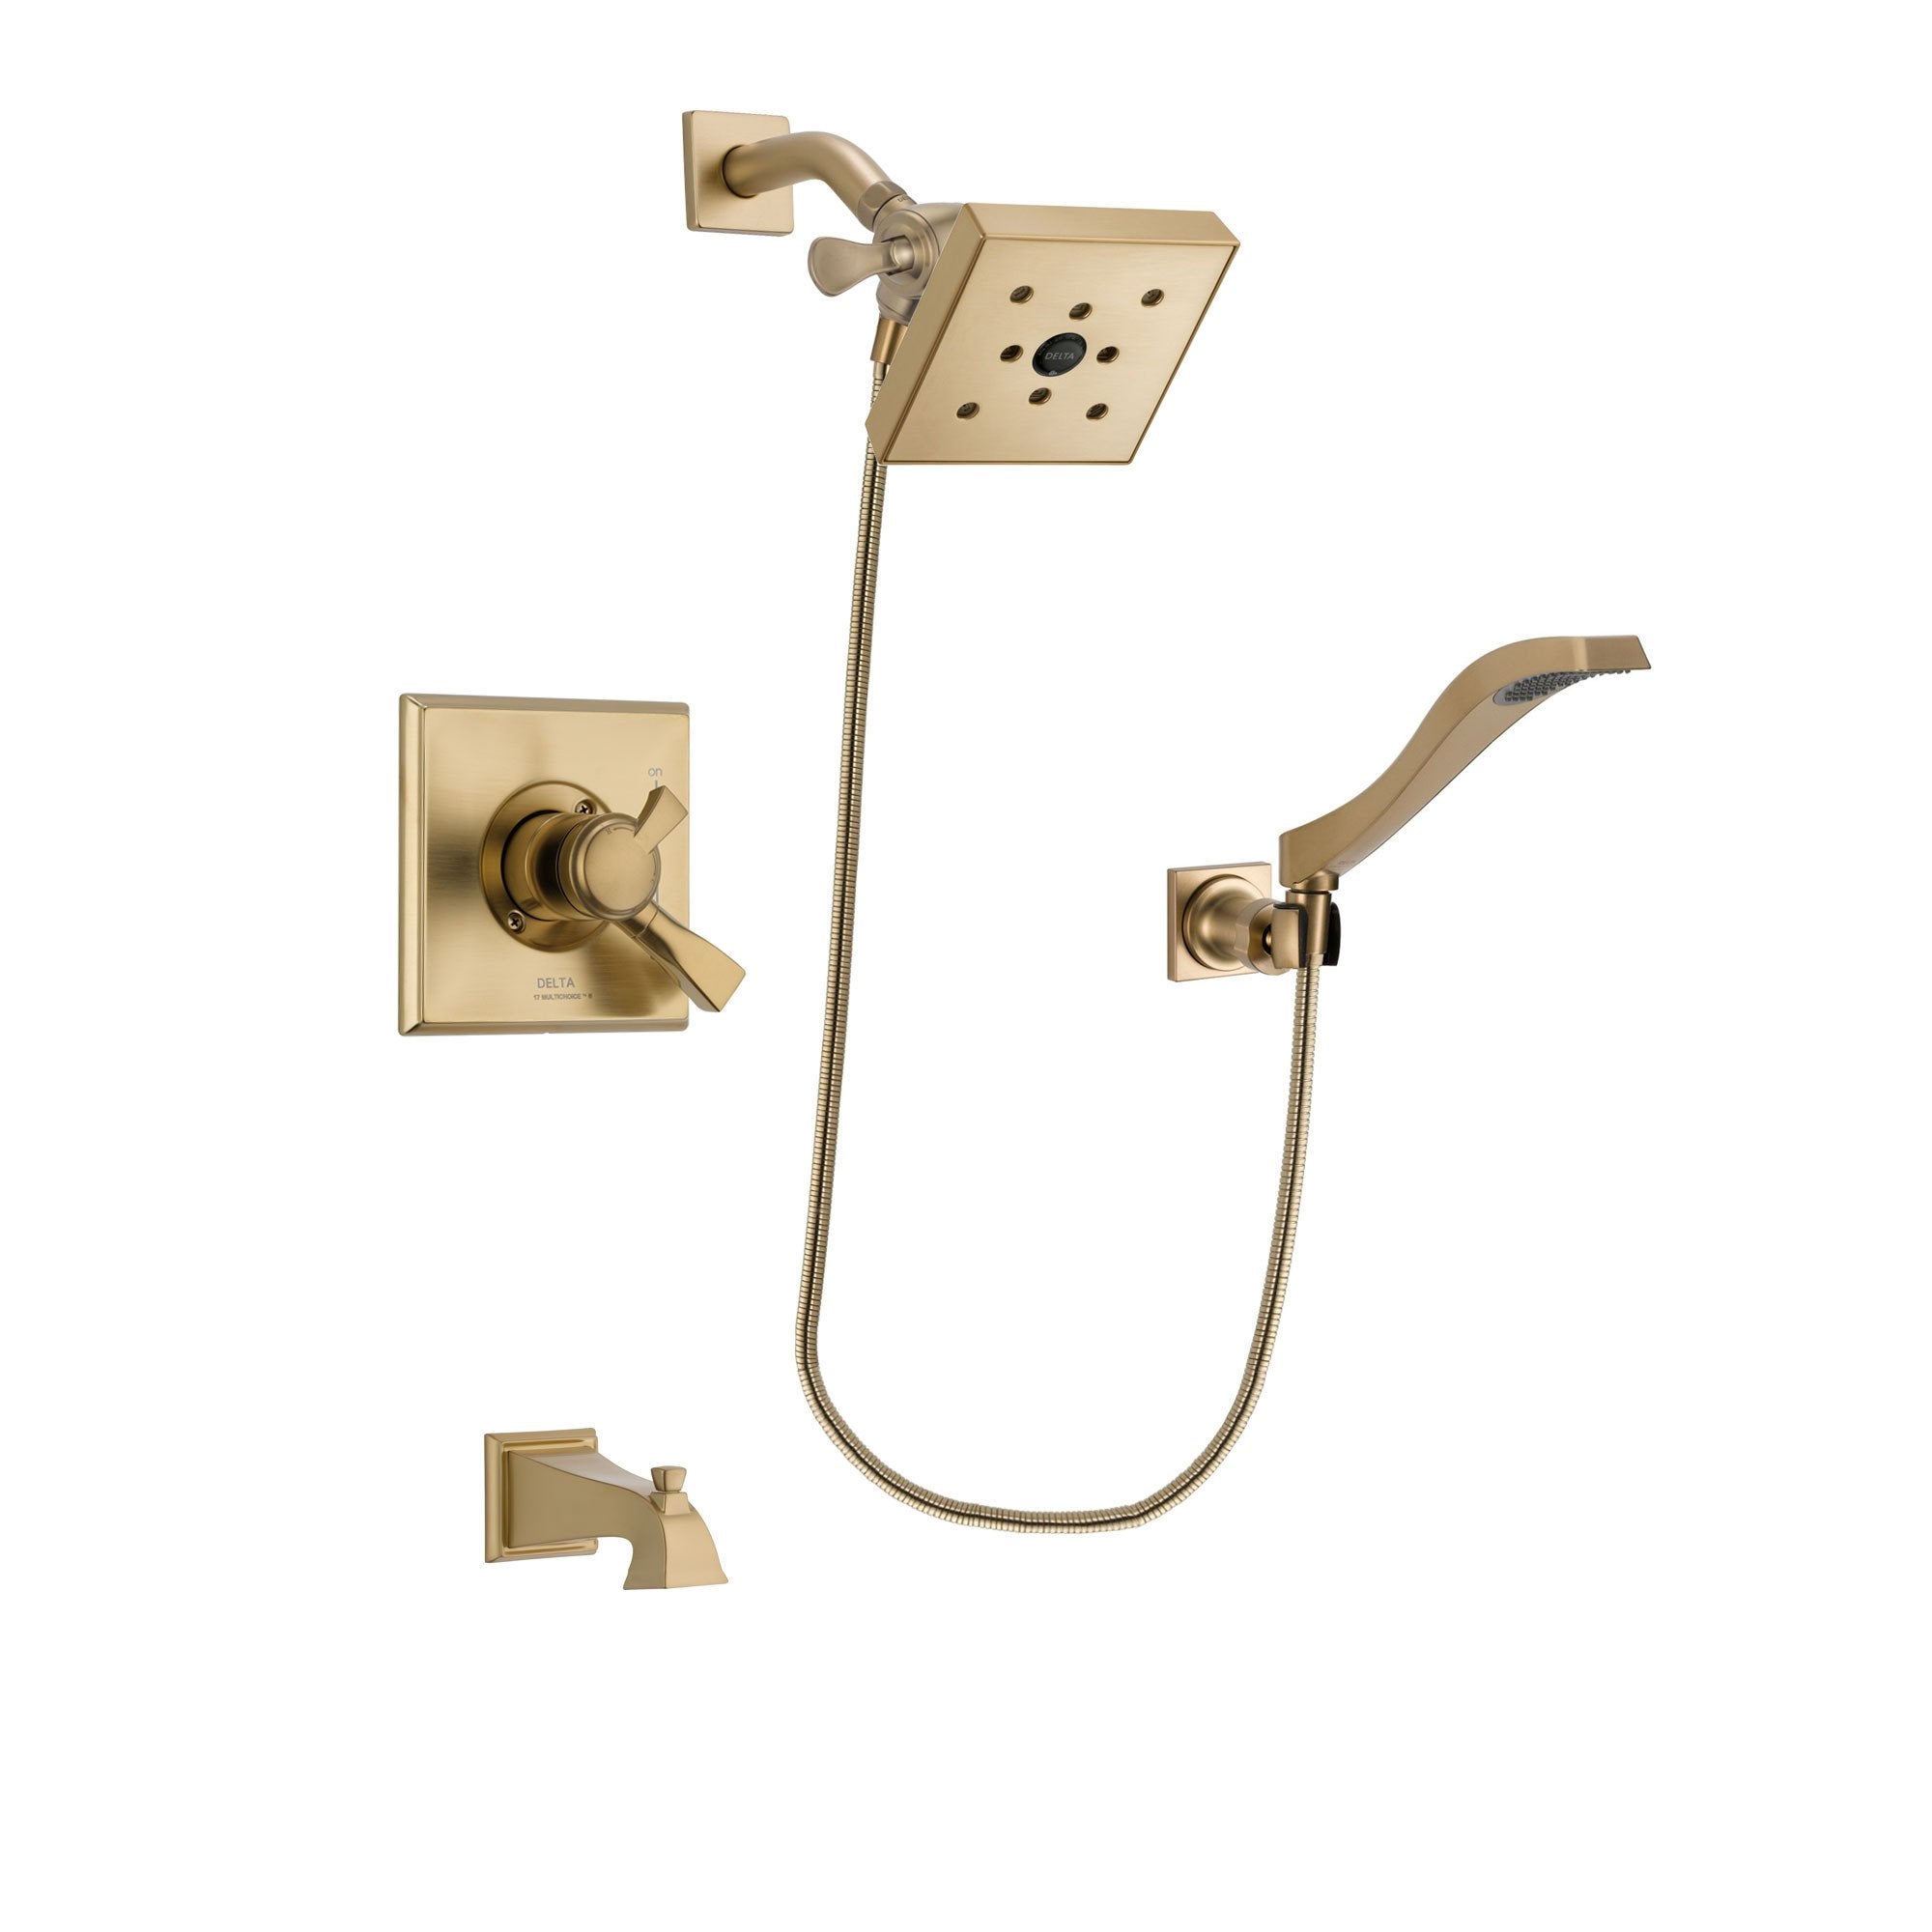 Delta Dryden Champagne Bronze Finish Dual Control Tub and Shower Faucet System Package with Square Shower Head and Modern Wall Mount Handheld Shower Spray Includes Rough-in Valve and Tub Spout DSP3869V